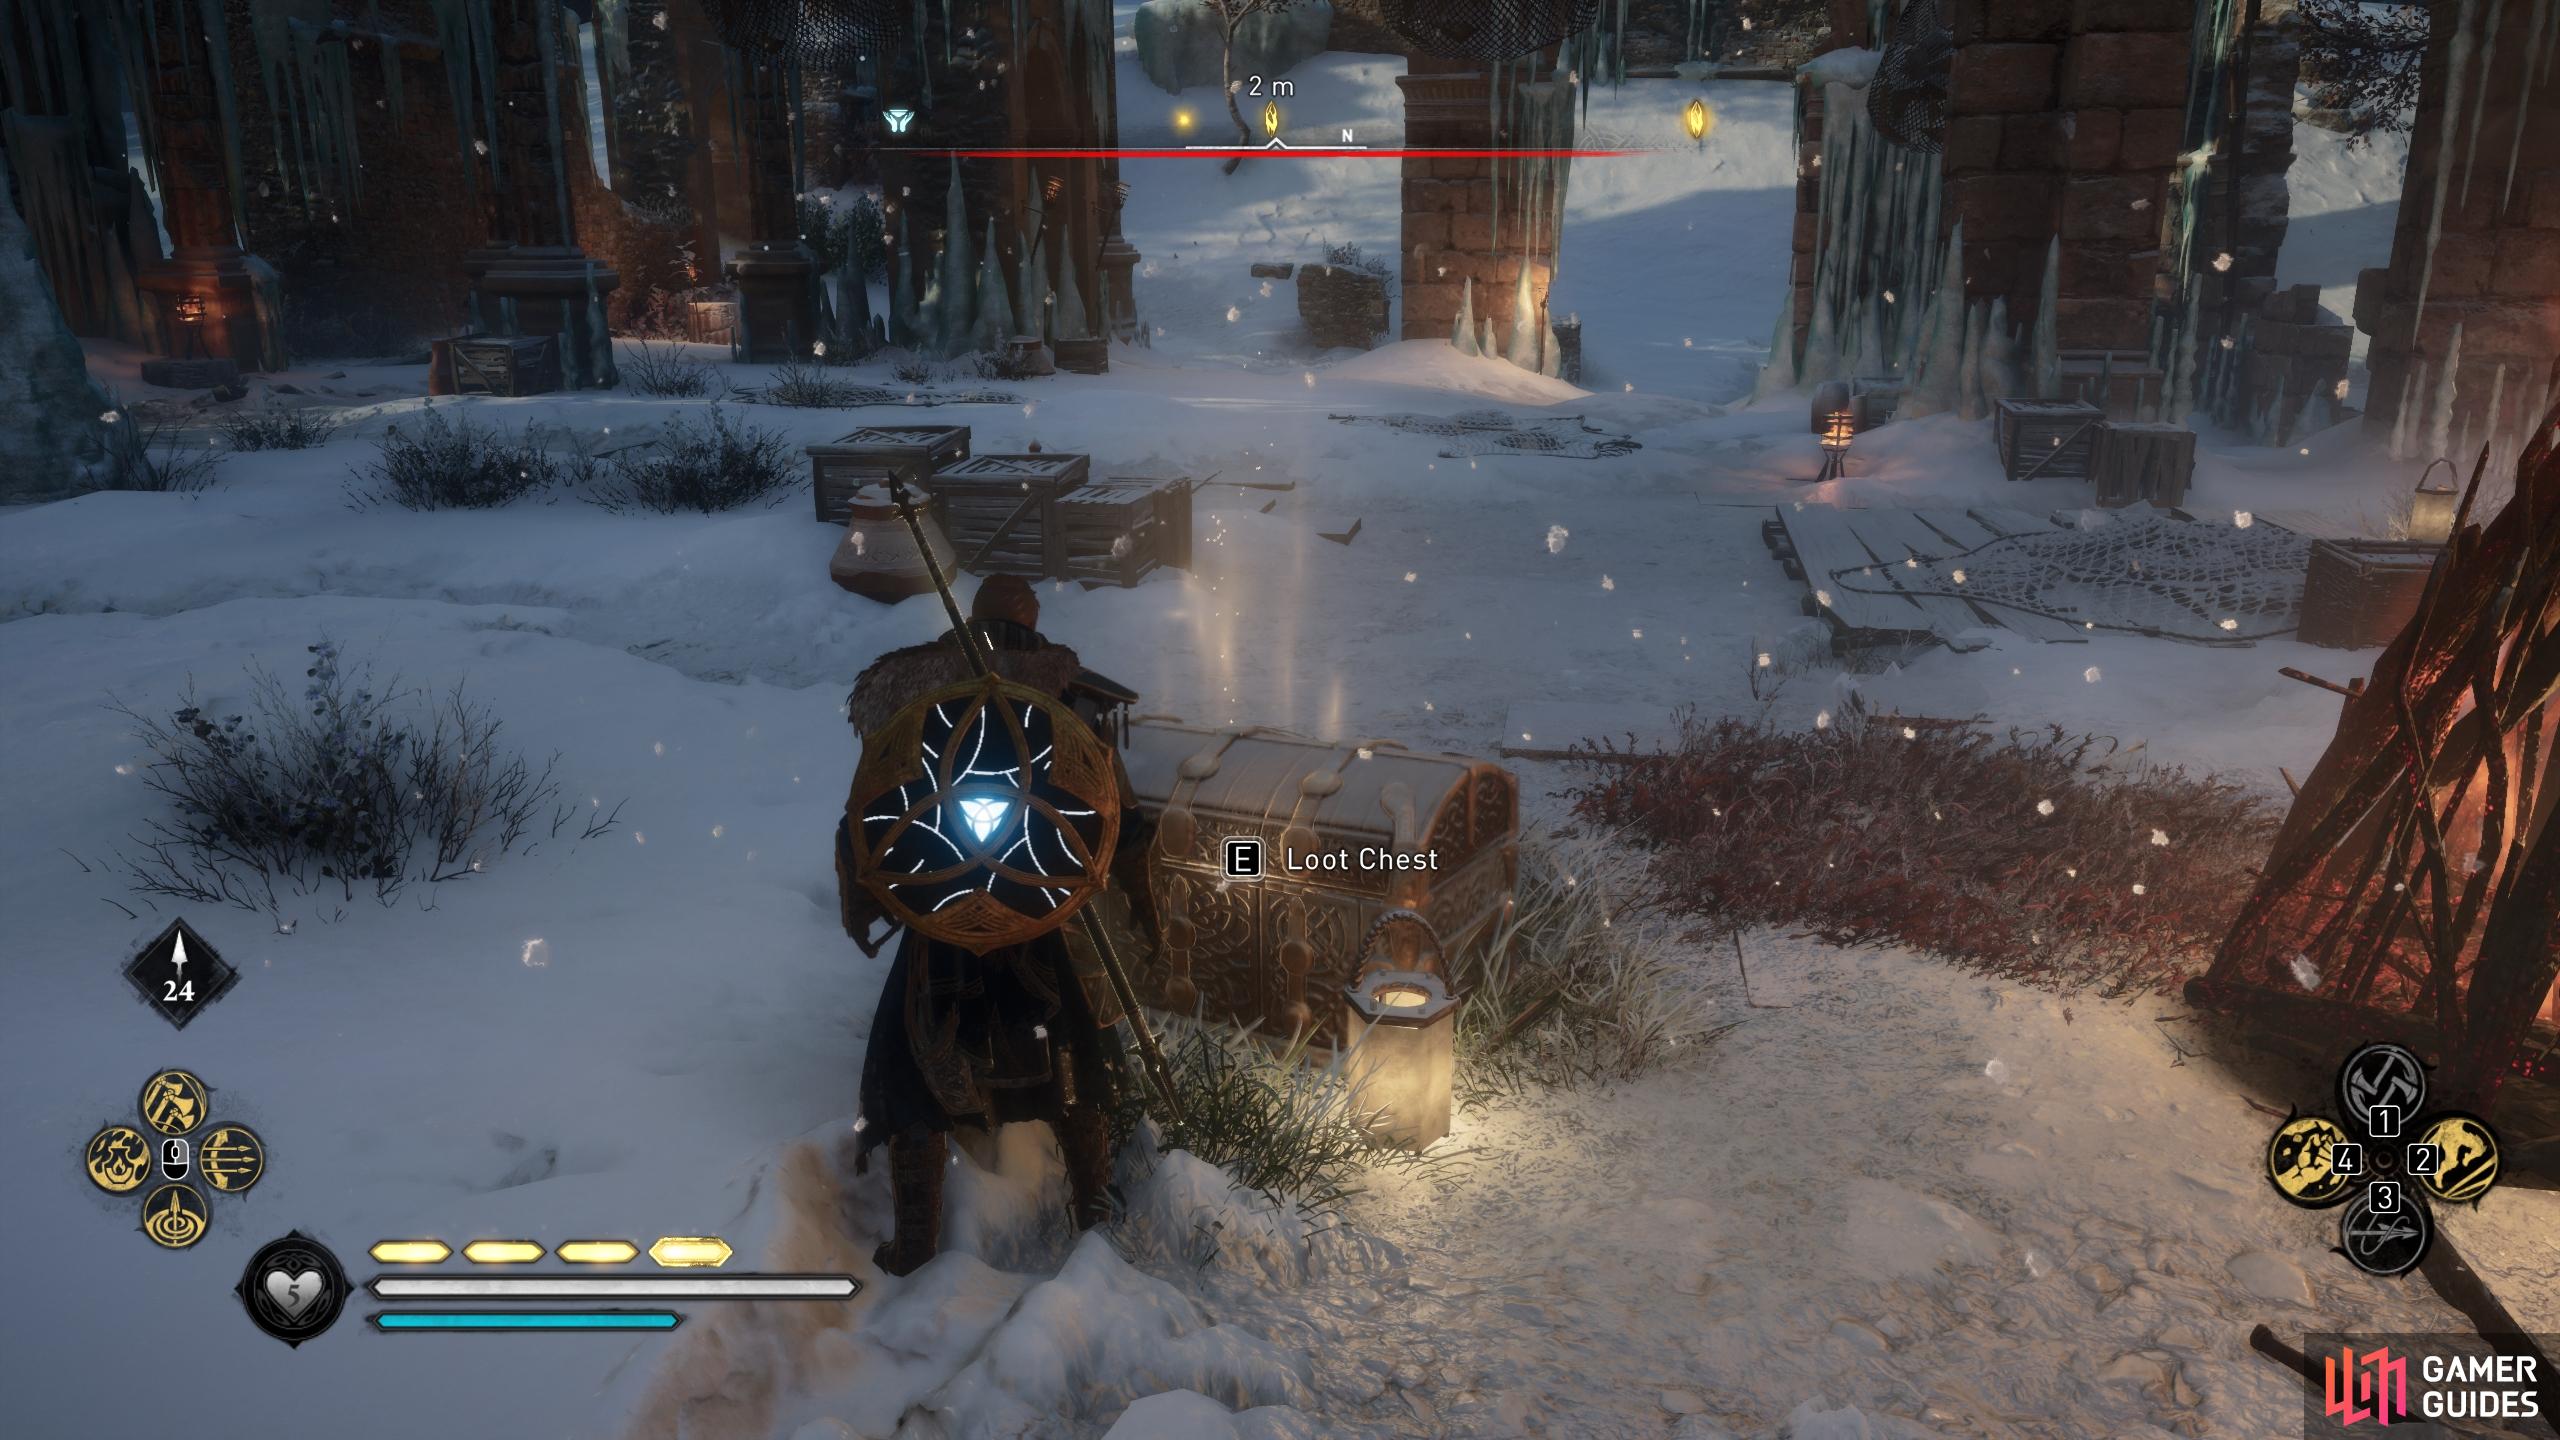 You'll find the chest in the centre of the ruins, surrounded by Jotnar.